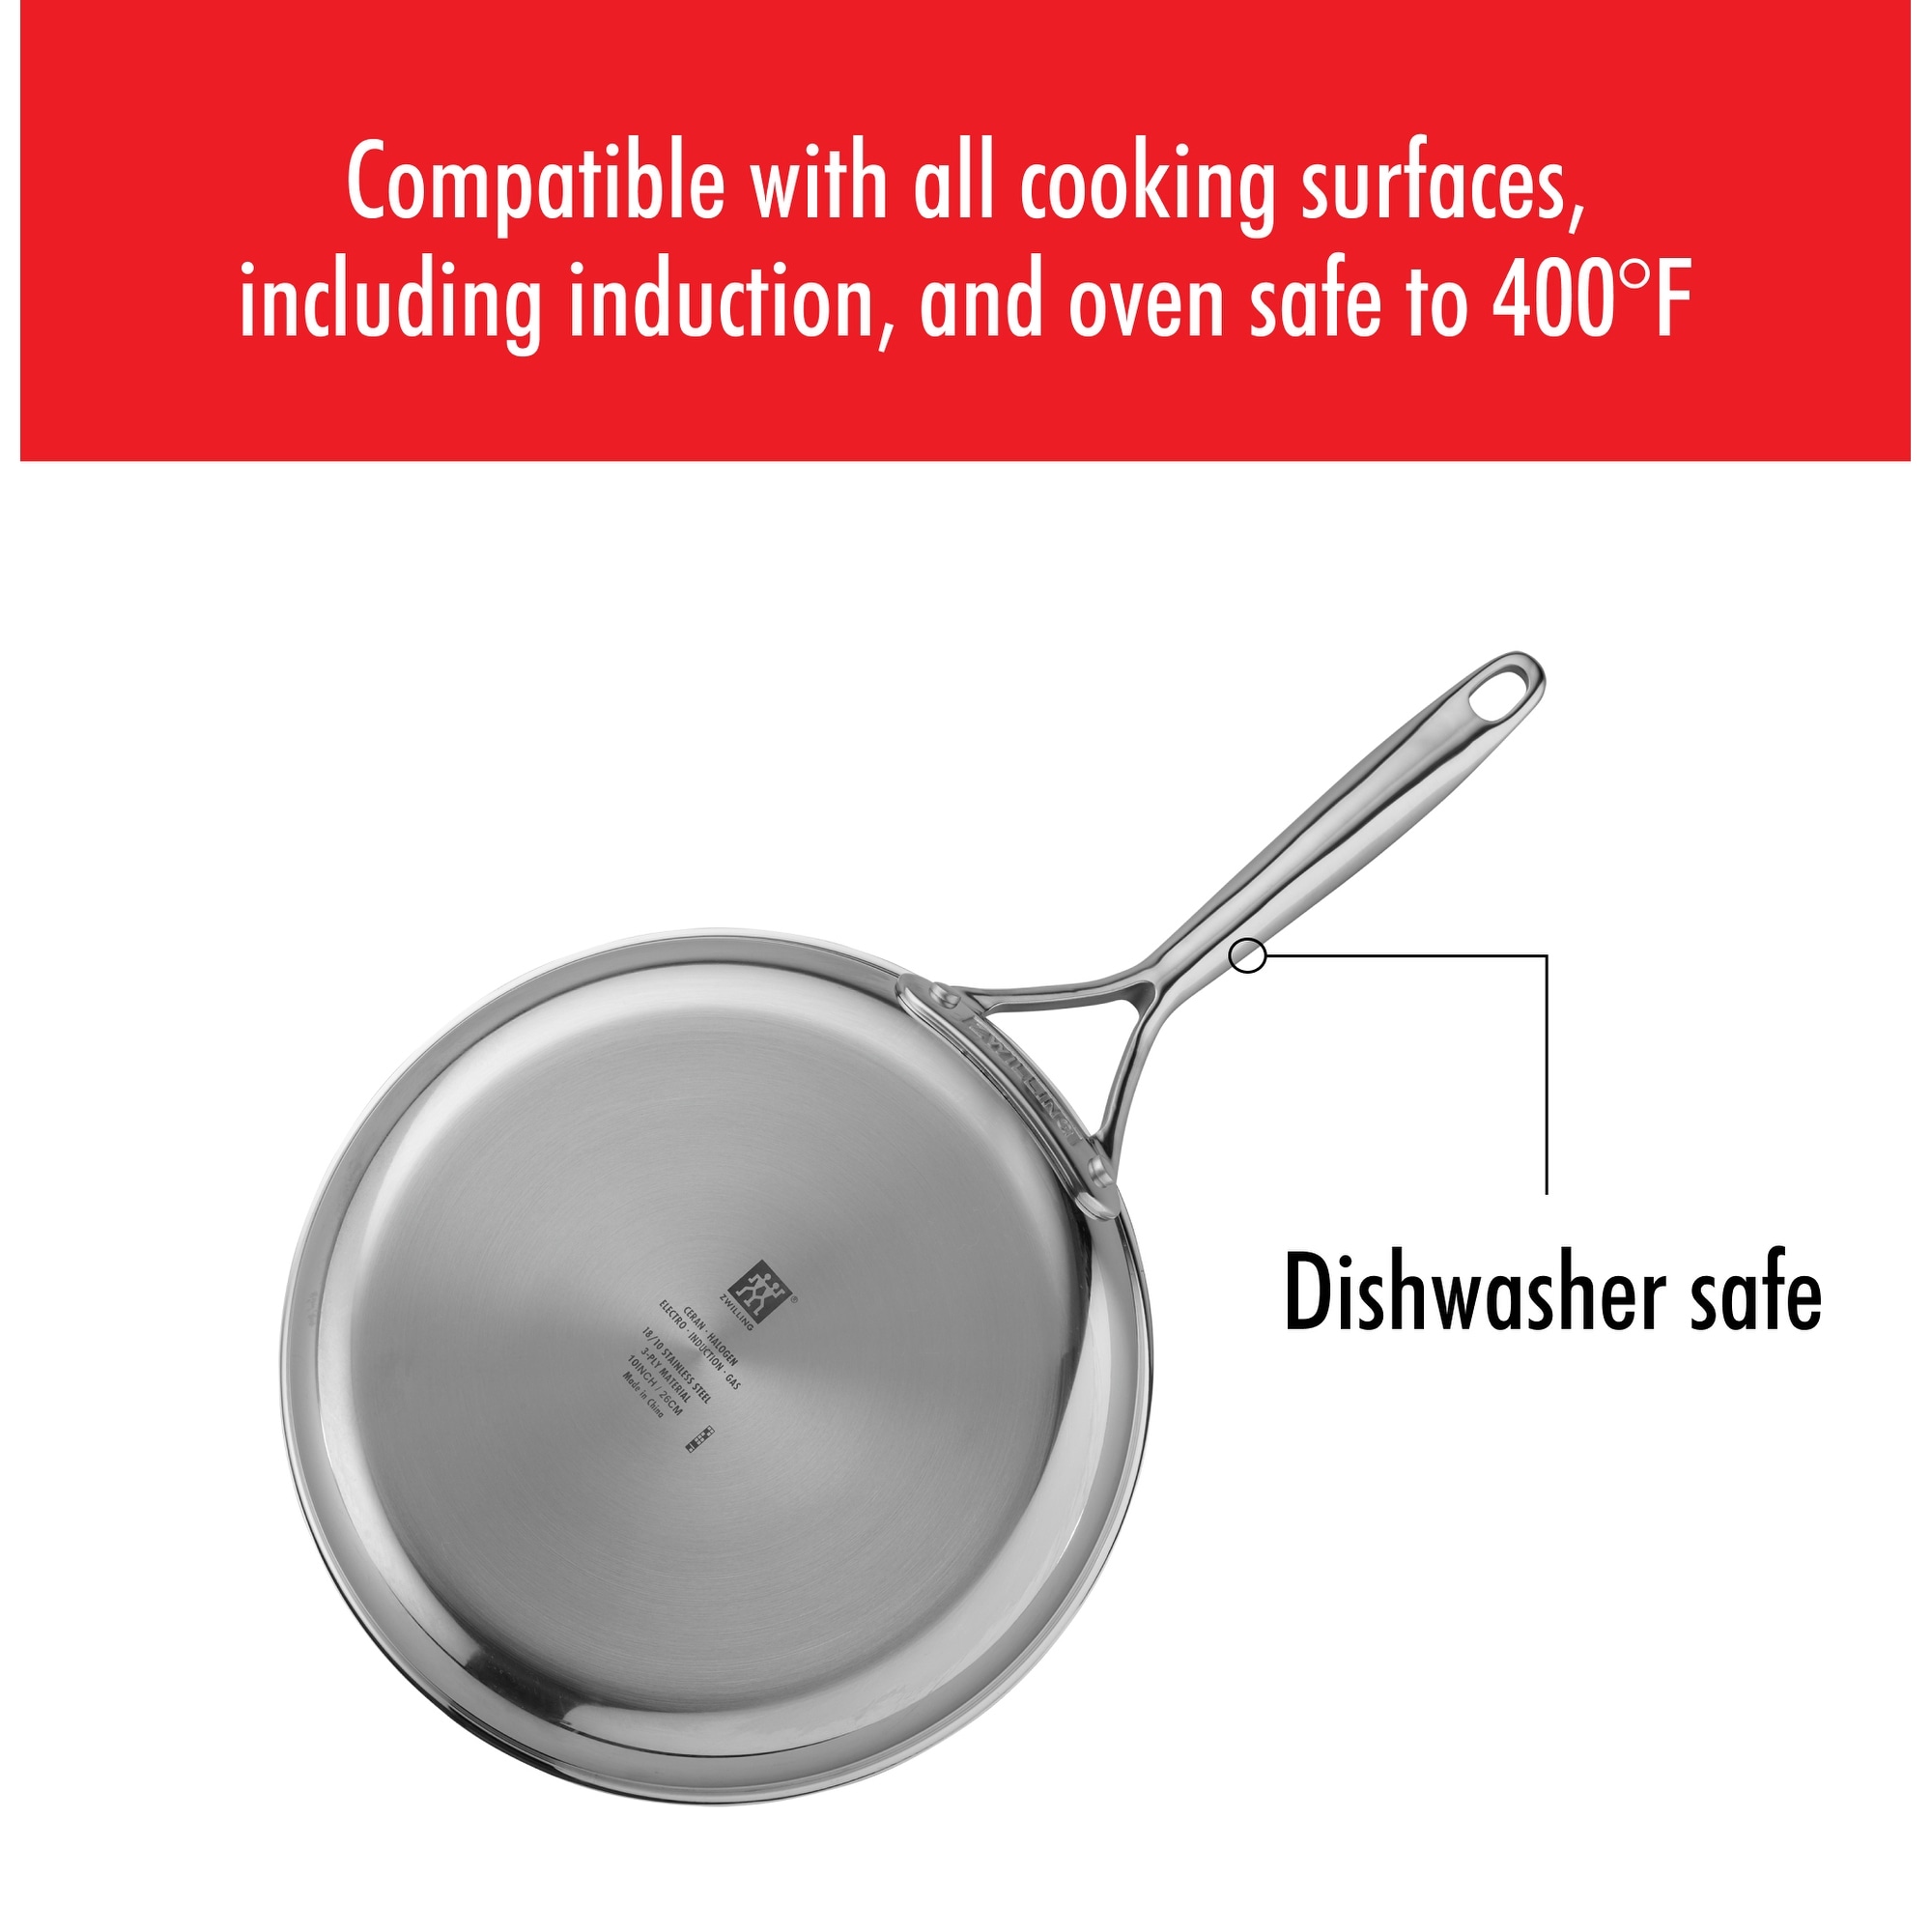 https://ak1.ostkcdn.com/images/products/is/images/direct/af5149f2f8e3e00300a9f53d41ed8048f4eea201/ZWILLING-Energy-Plus-10-inch-Stainless-Steel-Ceramic-Nonstick-Fry-Pan-with-Lid.jpg